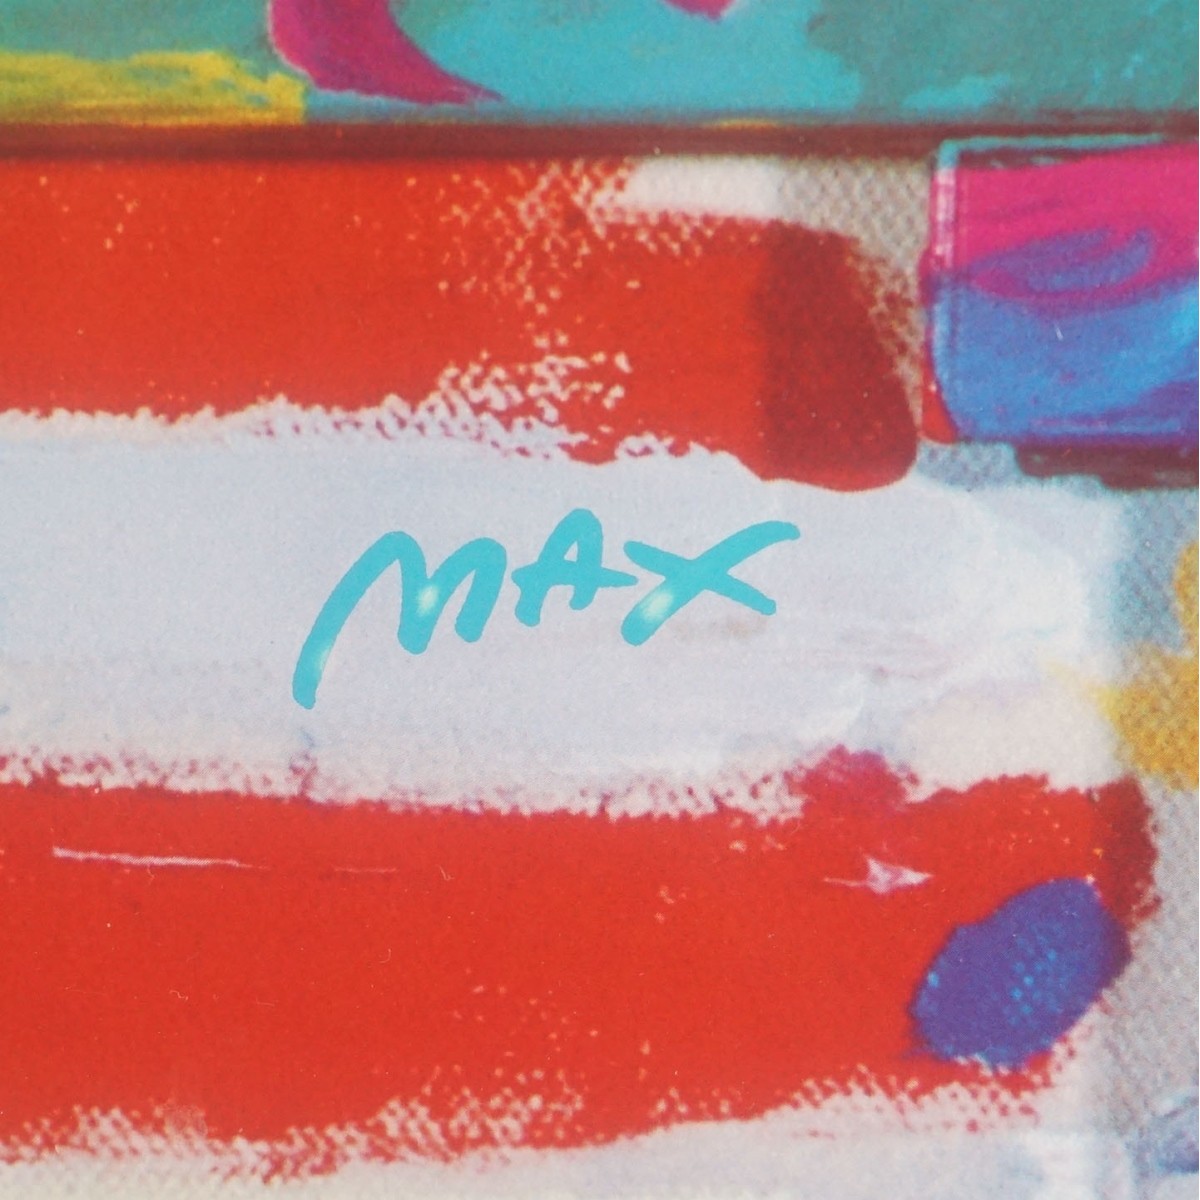 After: Peter Max (Born 1937)